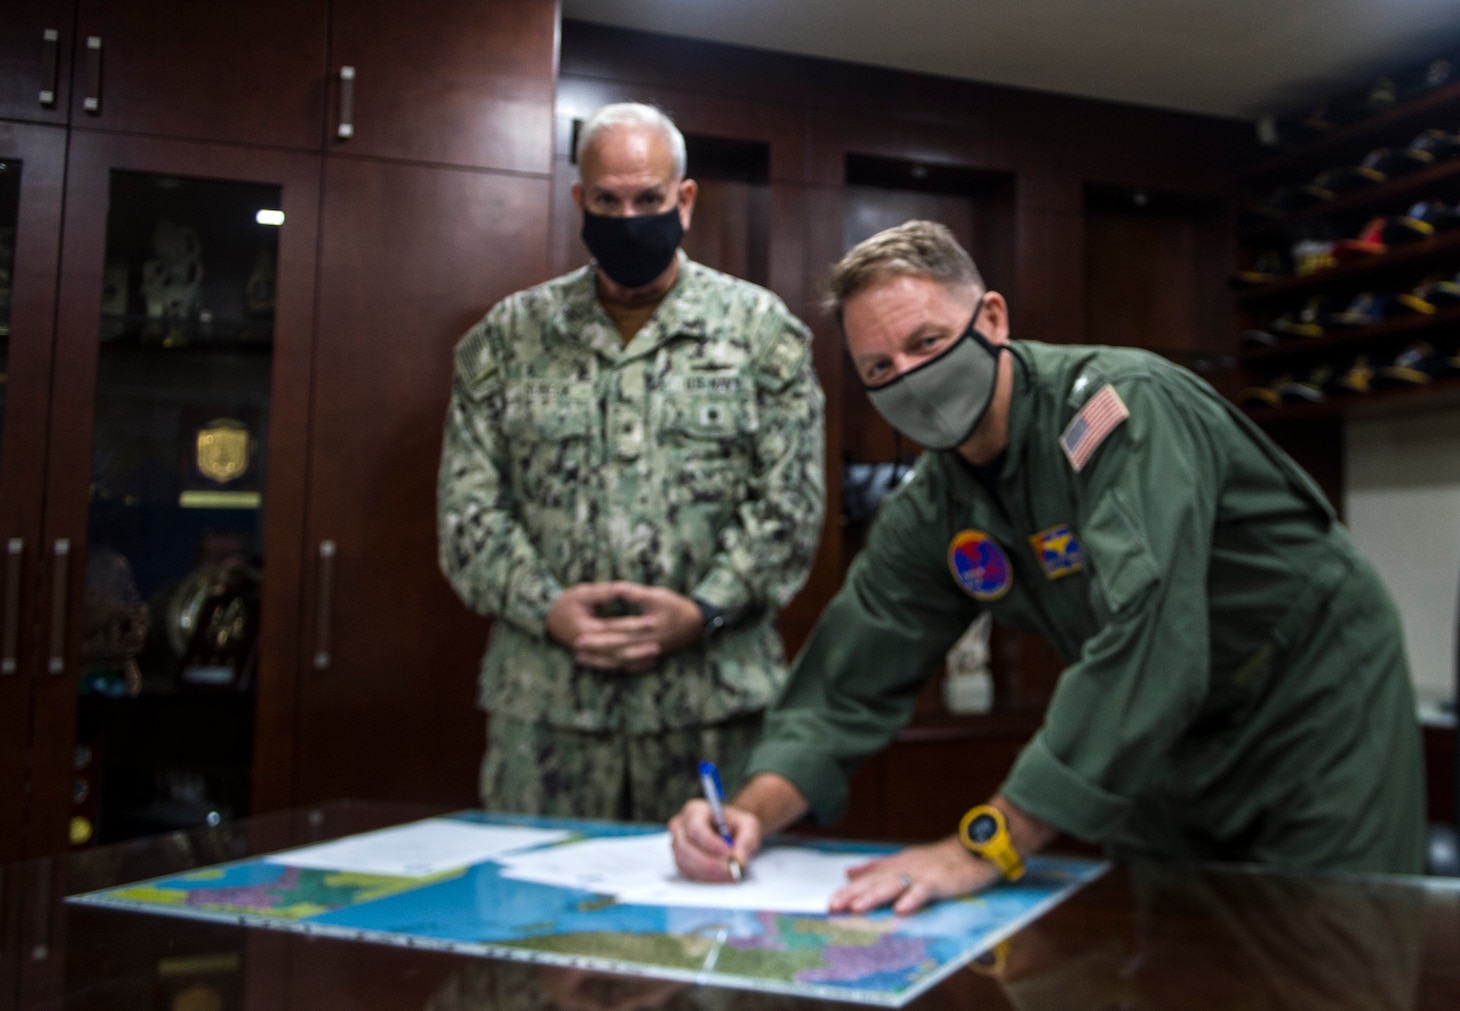 210726-N-HG389-0002 SINGAPORE (July 26, 2021) Rear Adm. Joey Tynch, the outgoing commander of Logistics Group Western Pacific/Task Force 73 (COMLOG WESTPAC/CTF 73), right, and Rear Adm. Philip Sobeck, the incoming commander,  left, sign documents finalizing their change of command, July 26. COMLOG WESTPAC/CTF 73 is 7th Fleet's provider of combat-ready logistics, operating government-owned and contracted ships to keep units throughout the Fleet fueled, fed and in the fight. (U.S. Navy photo by Petty Officer 2nd Class Brandon Parker)